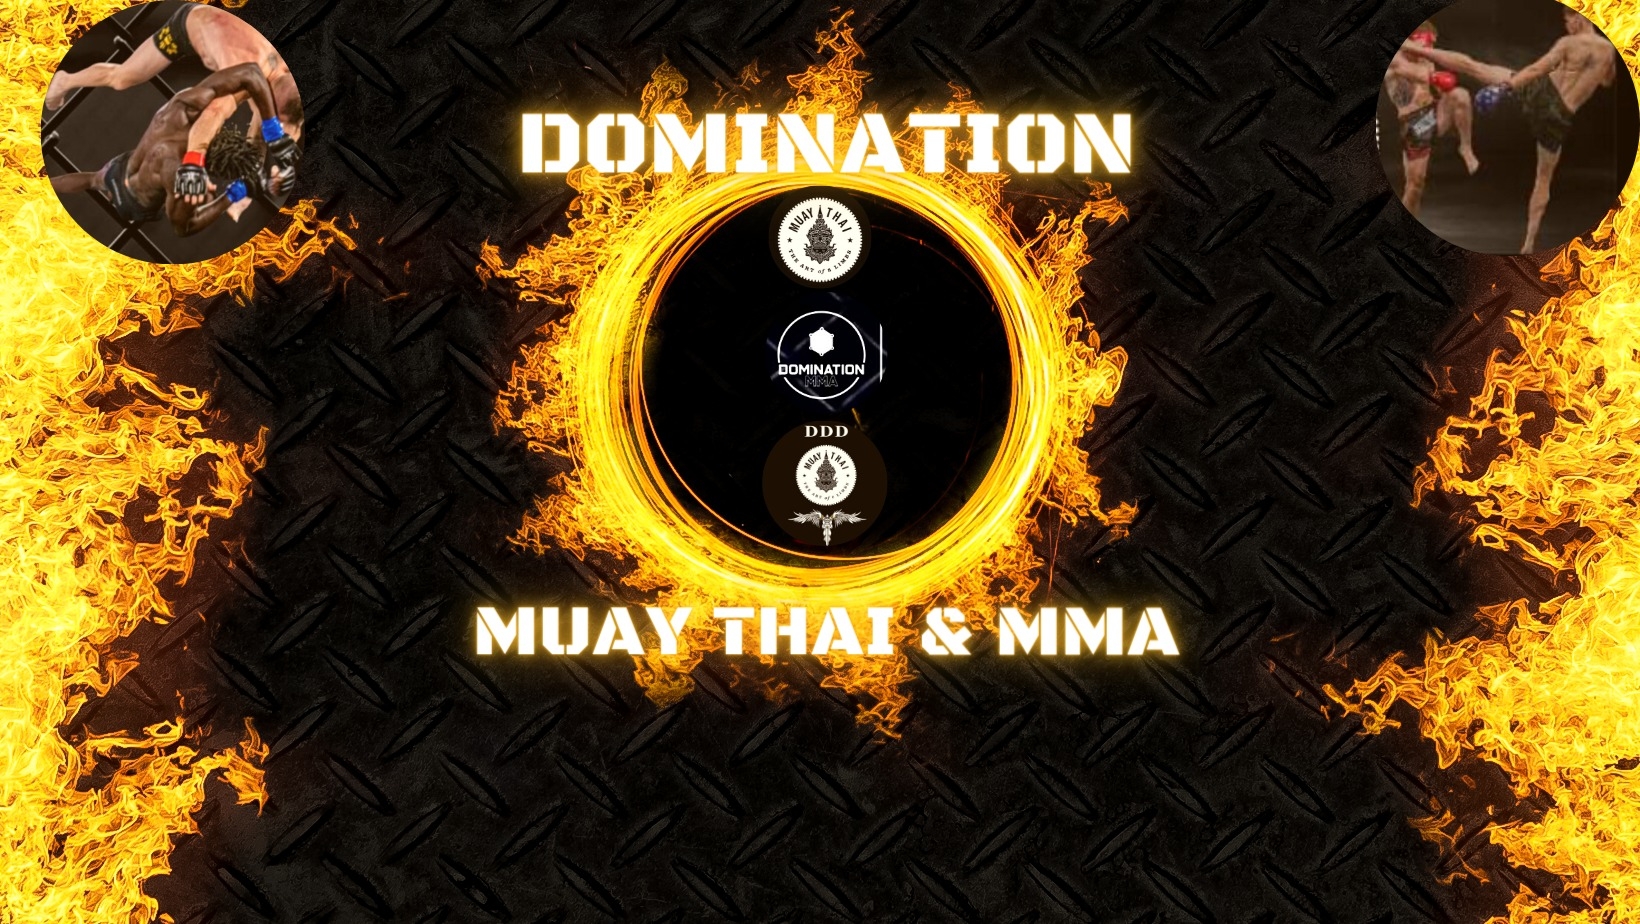 Image with text: Domination. Muay Thai and MMA. Action image of athletes fighting.